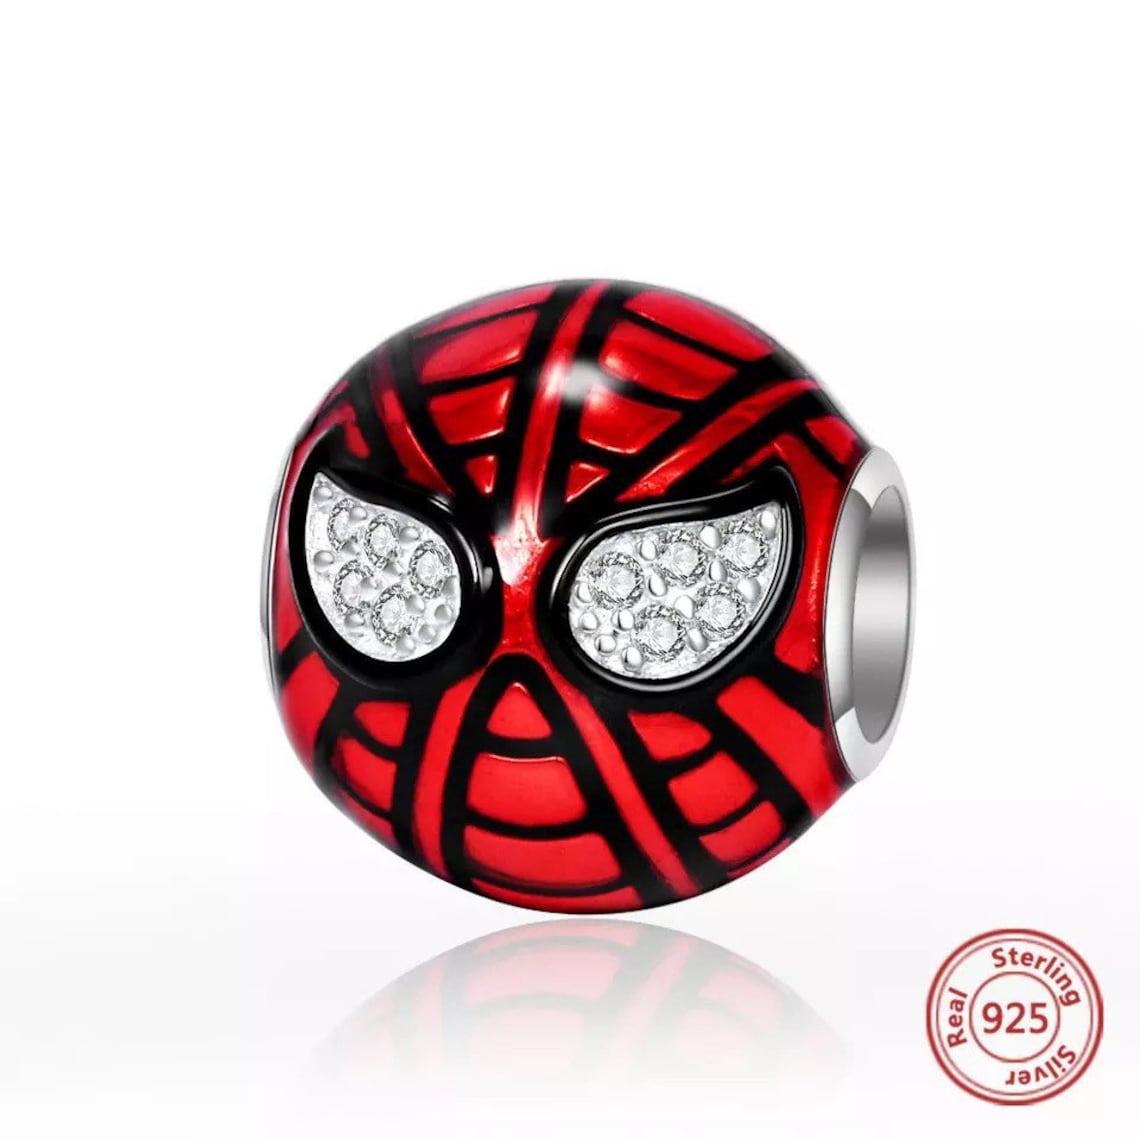 Spiderman 925 Sterling Silver Pandora Fit Charm Etsy